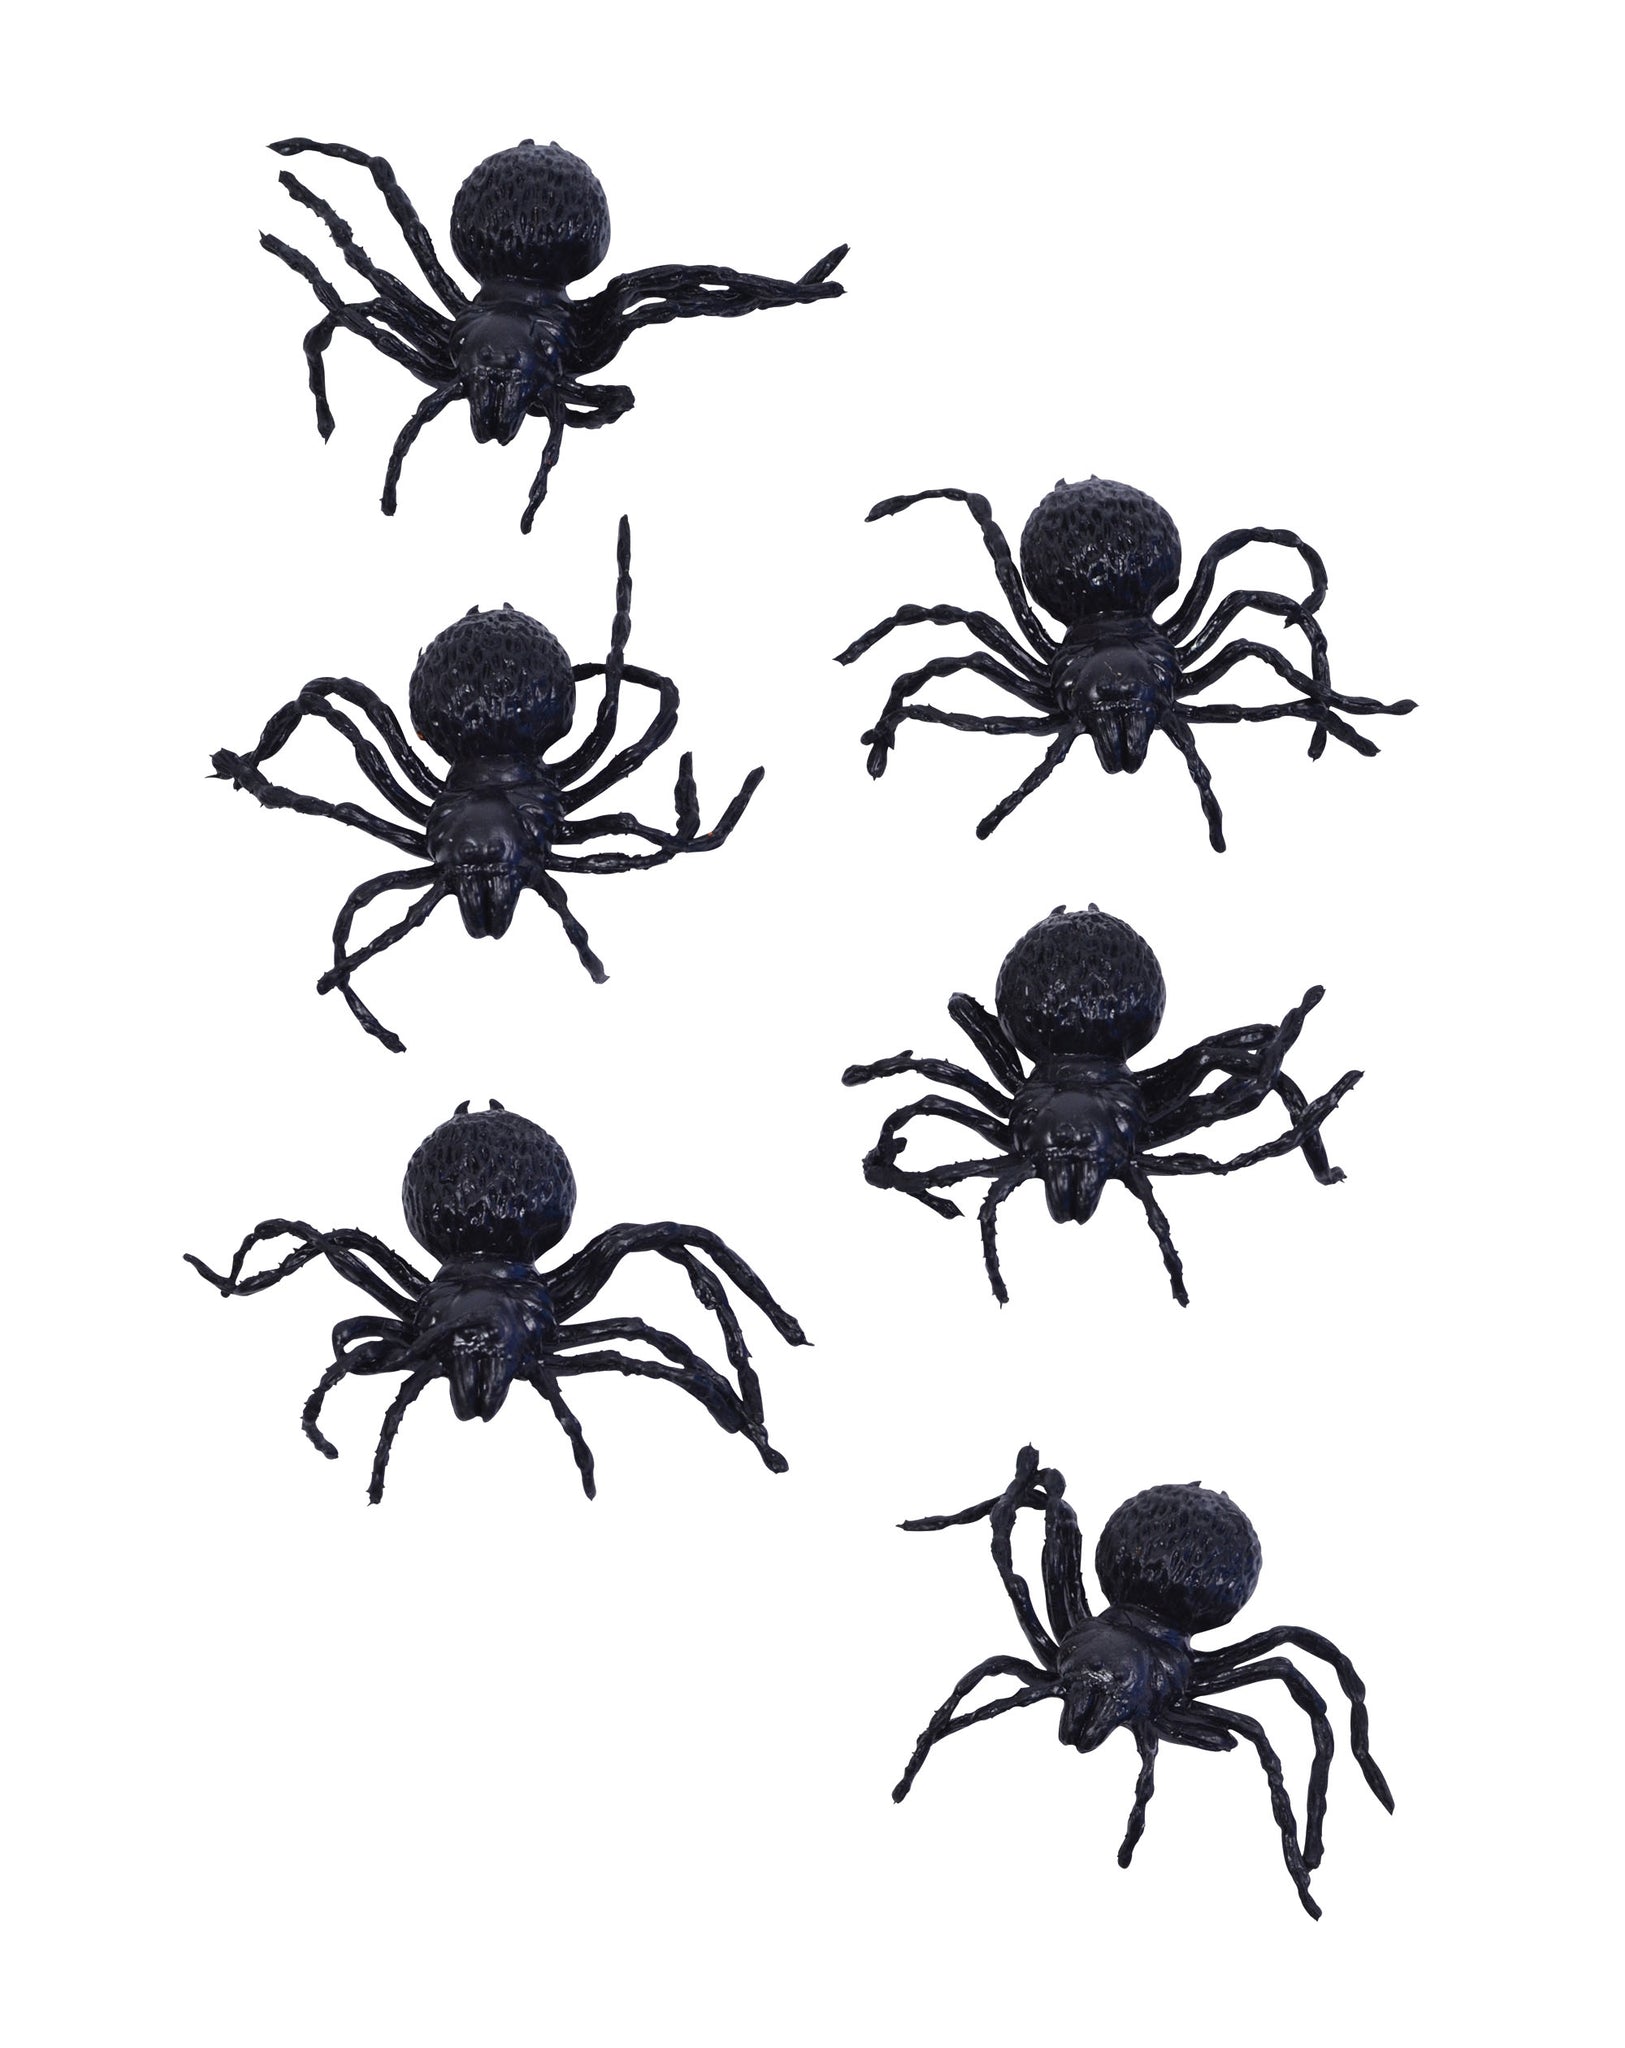 Six Small Spiders